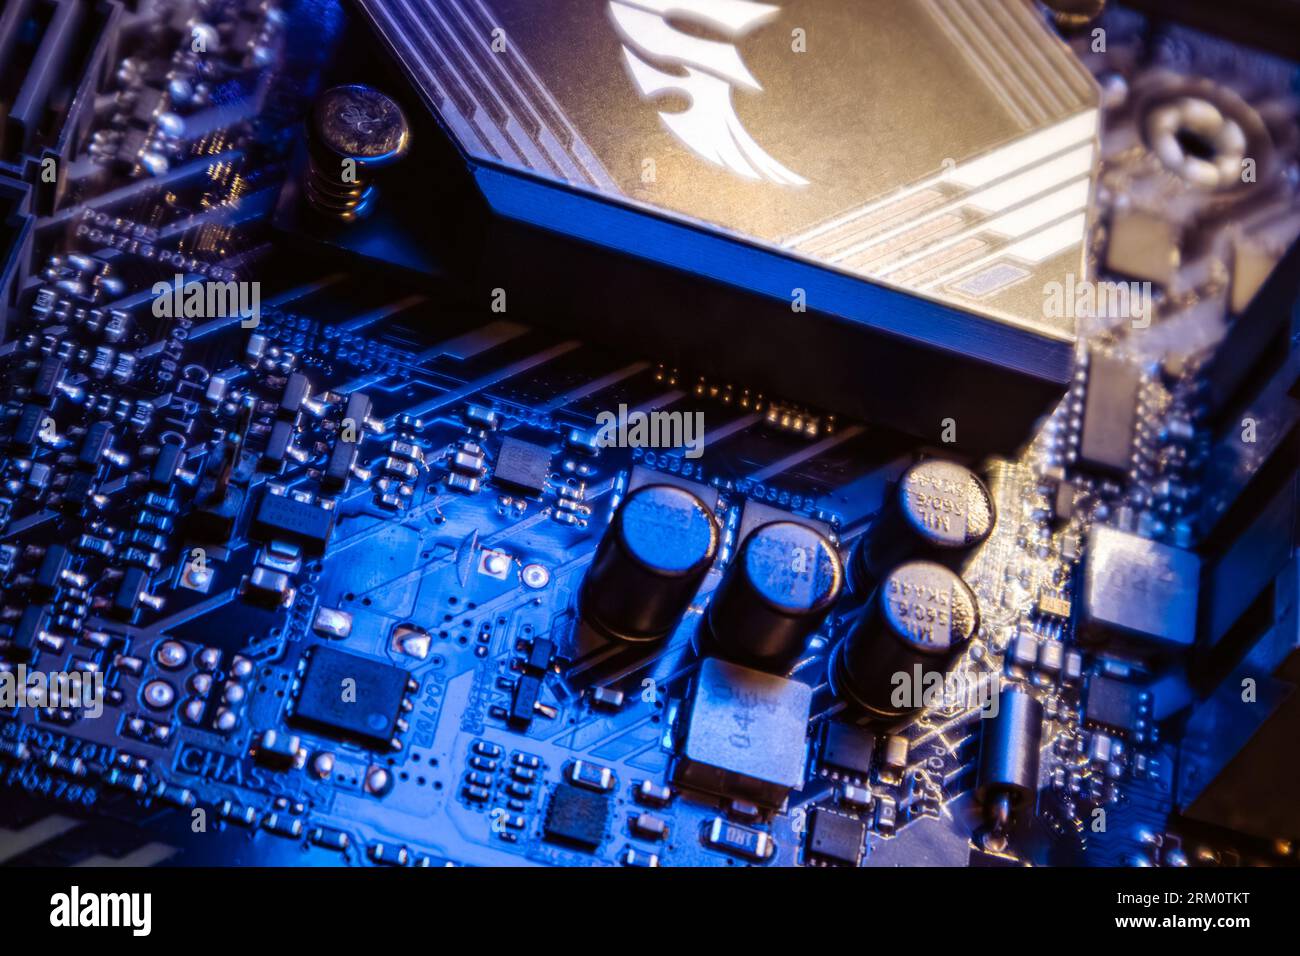 Kyiv, Ukraine - January 05, 2022: Asus Tuf Gaming modern PC motherboard with transistors and sockets. Computer chipset components close-up in blue lig Stock Photo